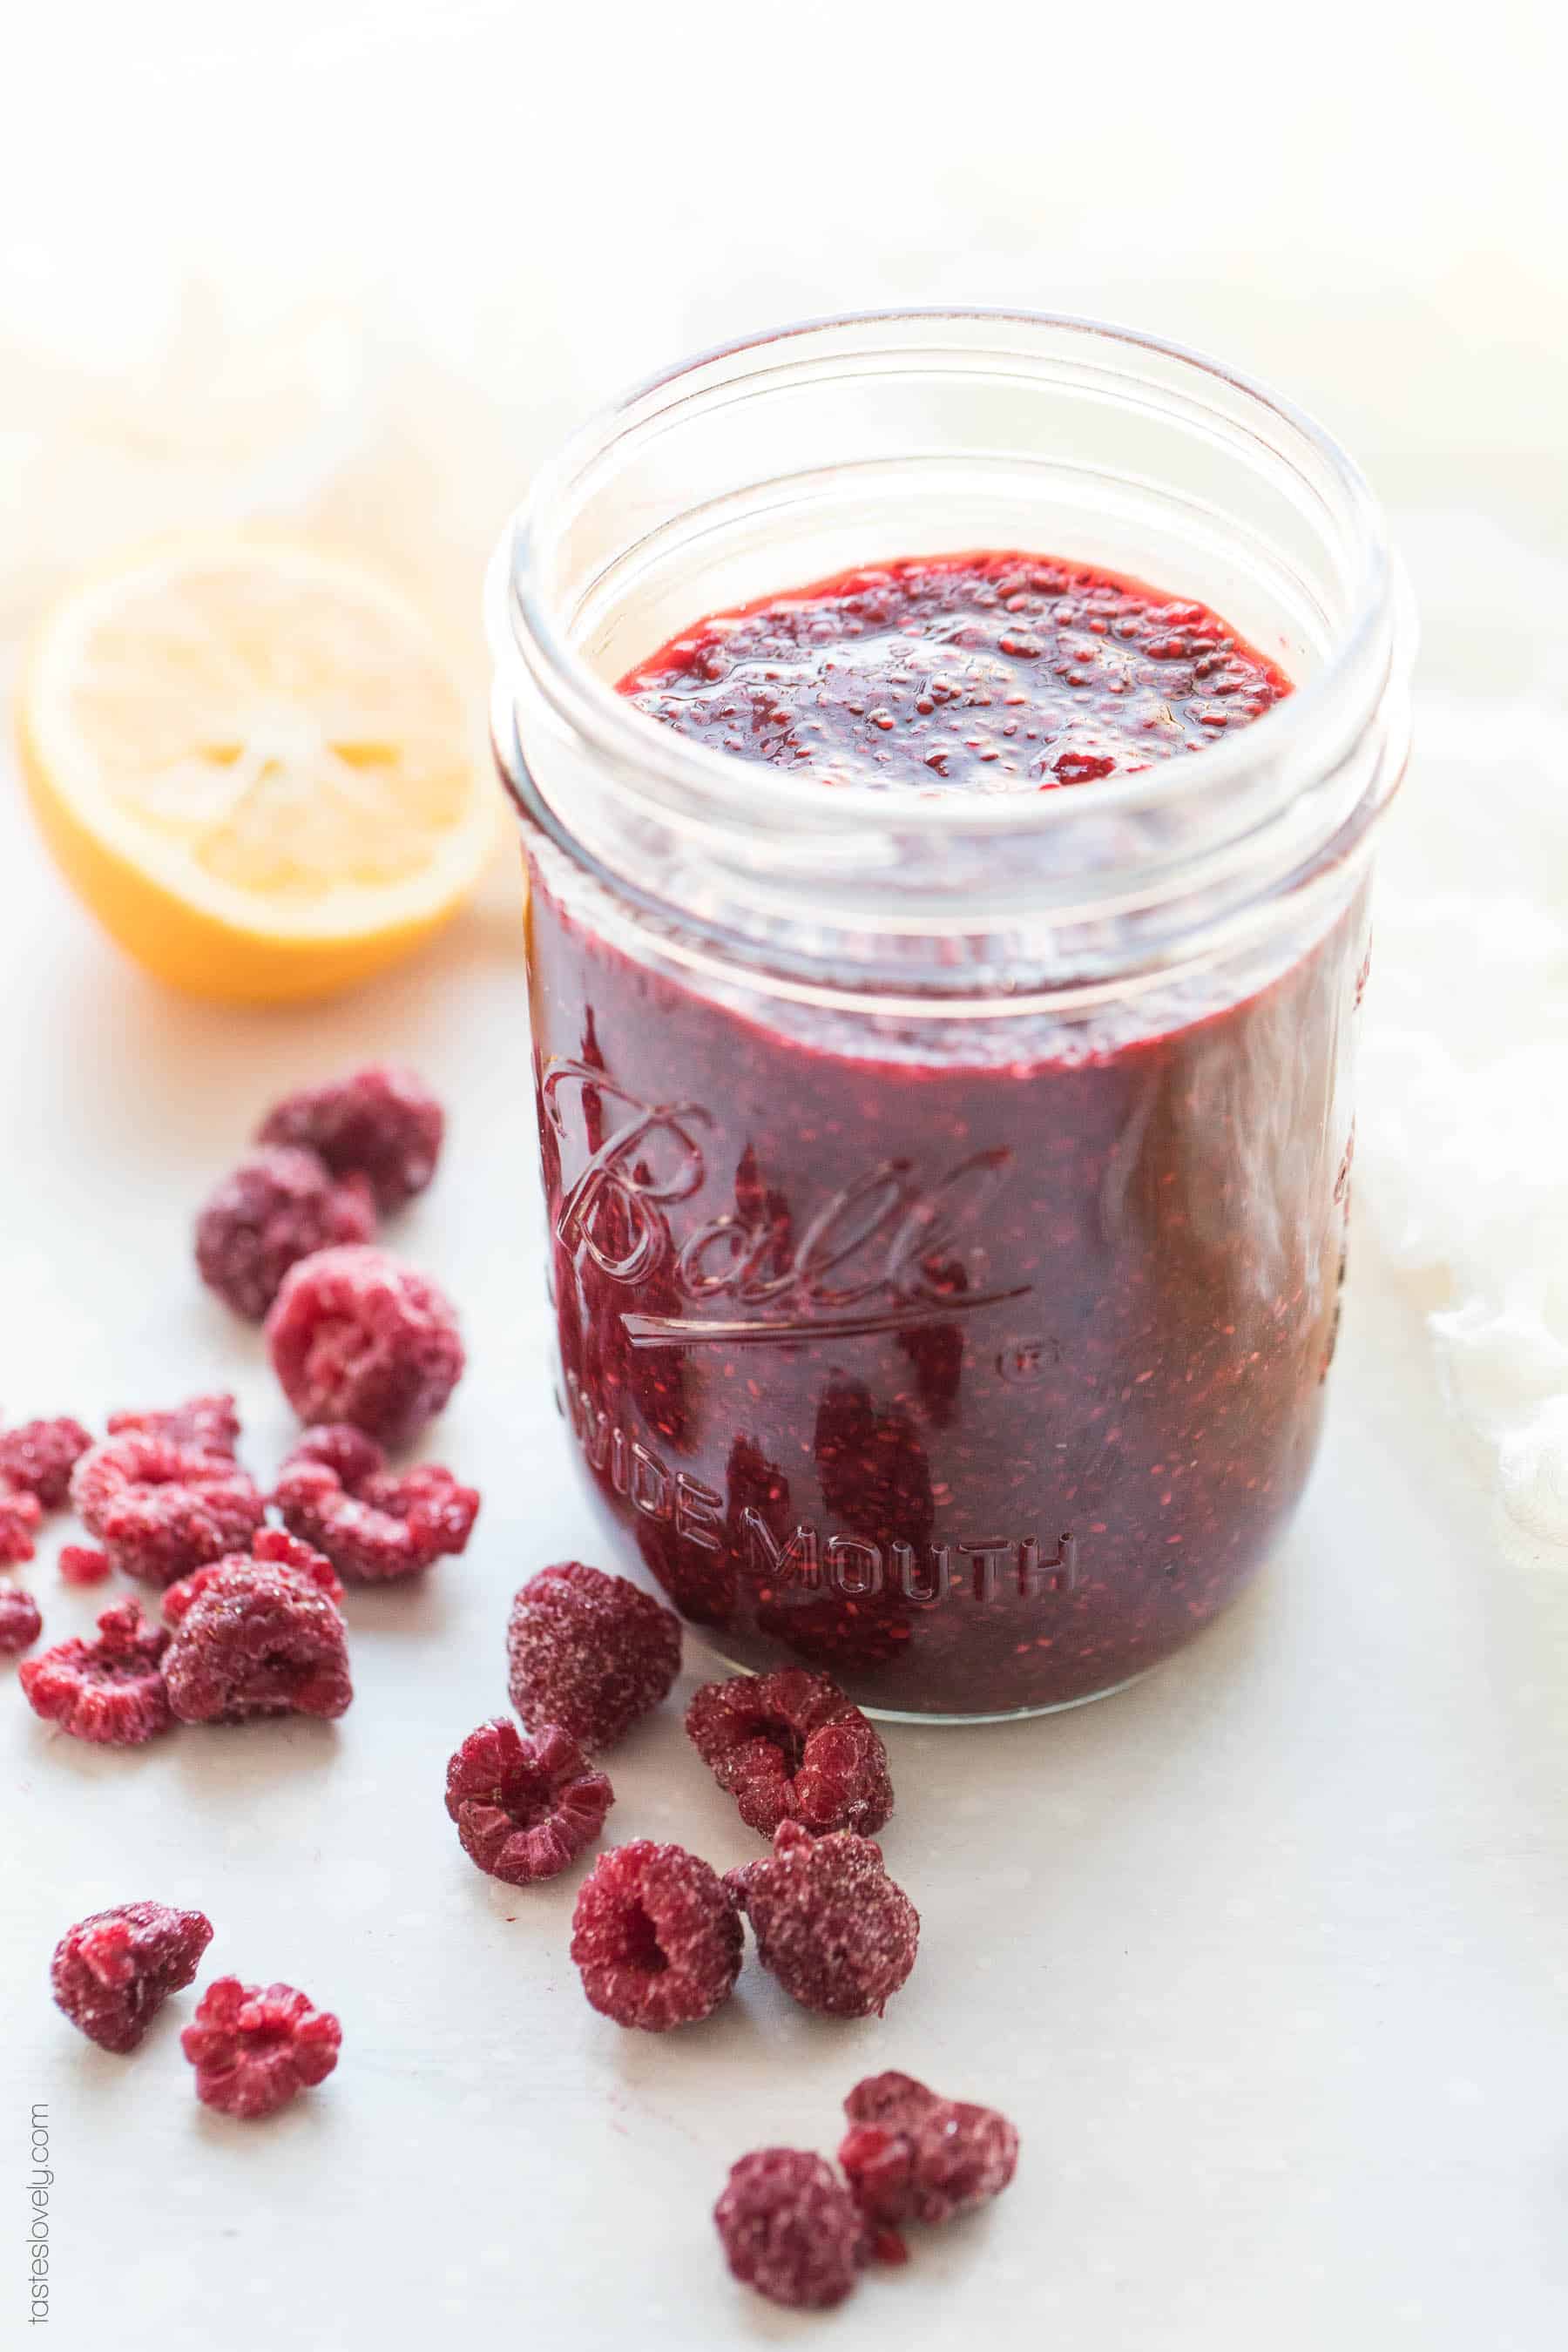 Paleo Chia Seed Jam with Frozen Berries - use any frozen berry! Sweetened with coconut sugar and freezer friendly.